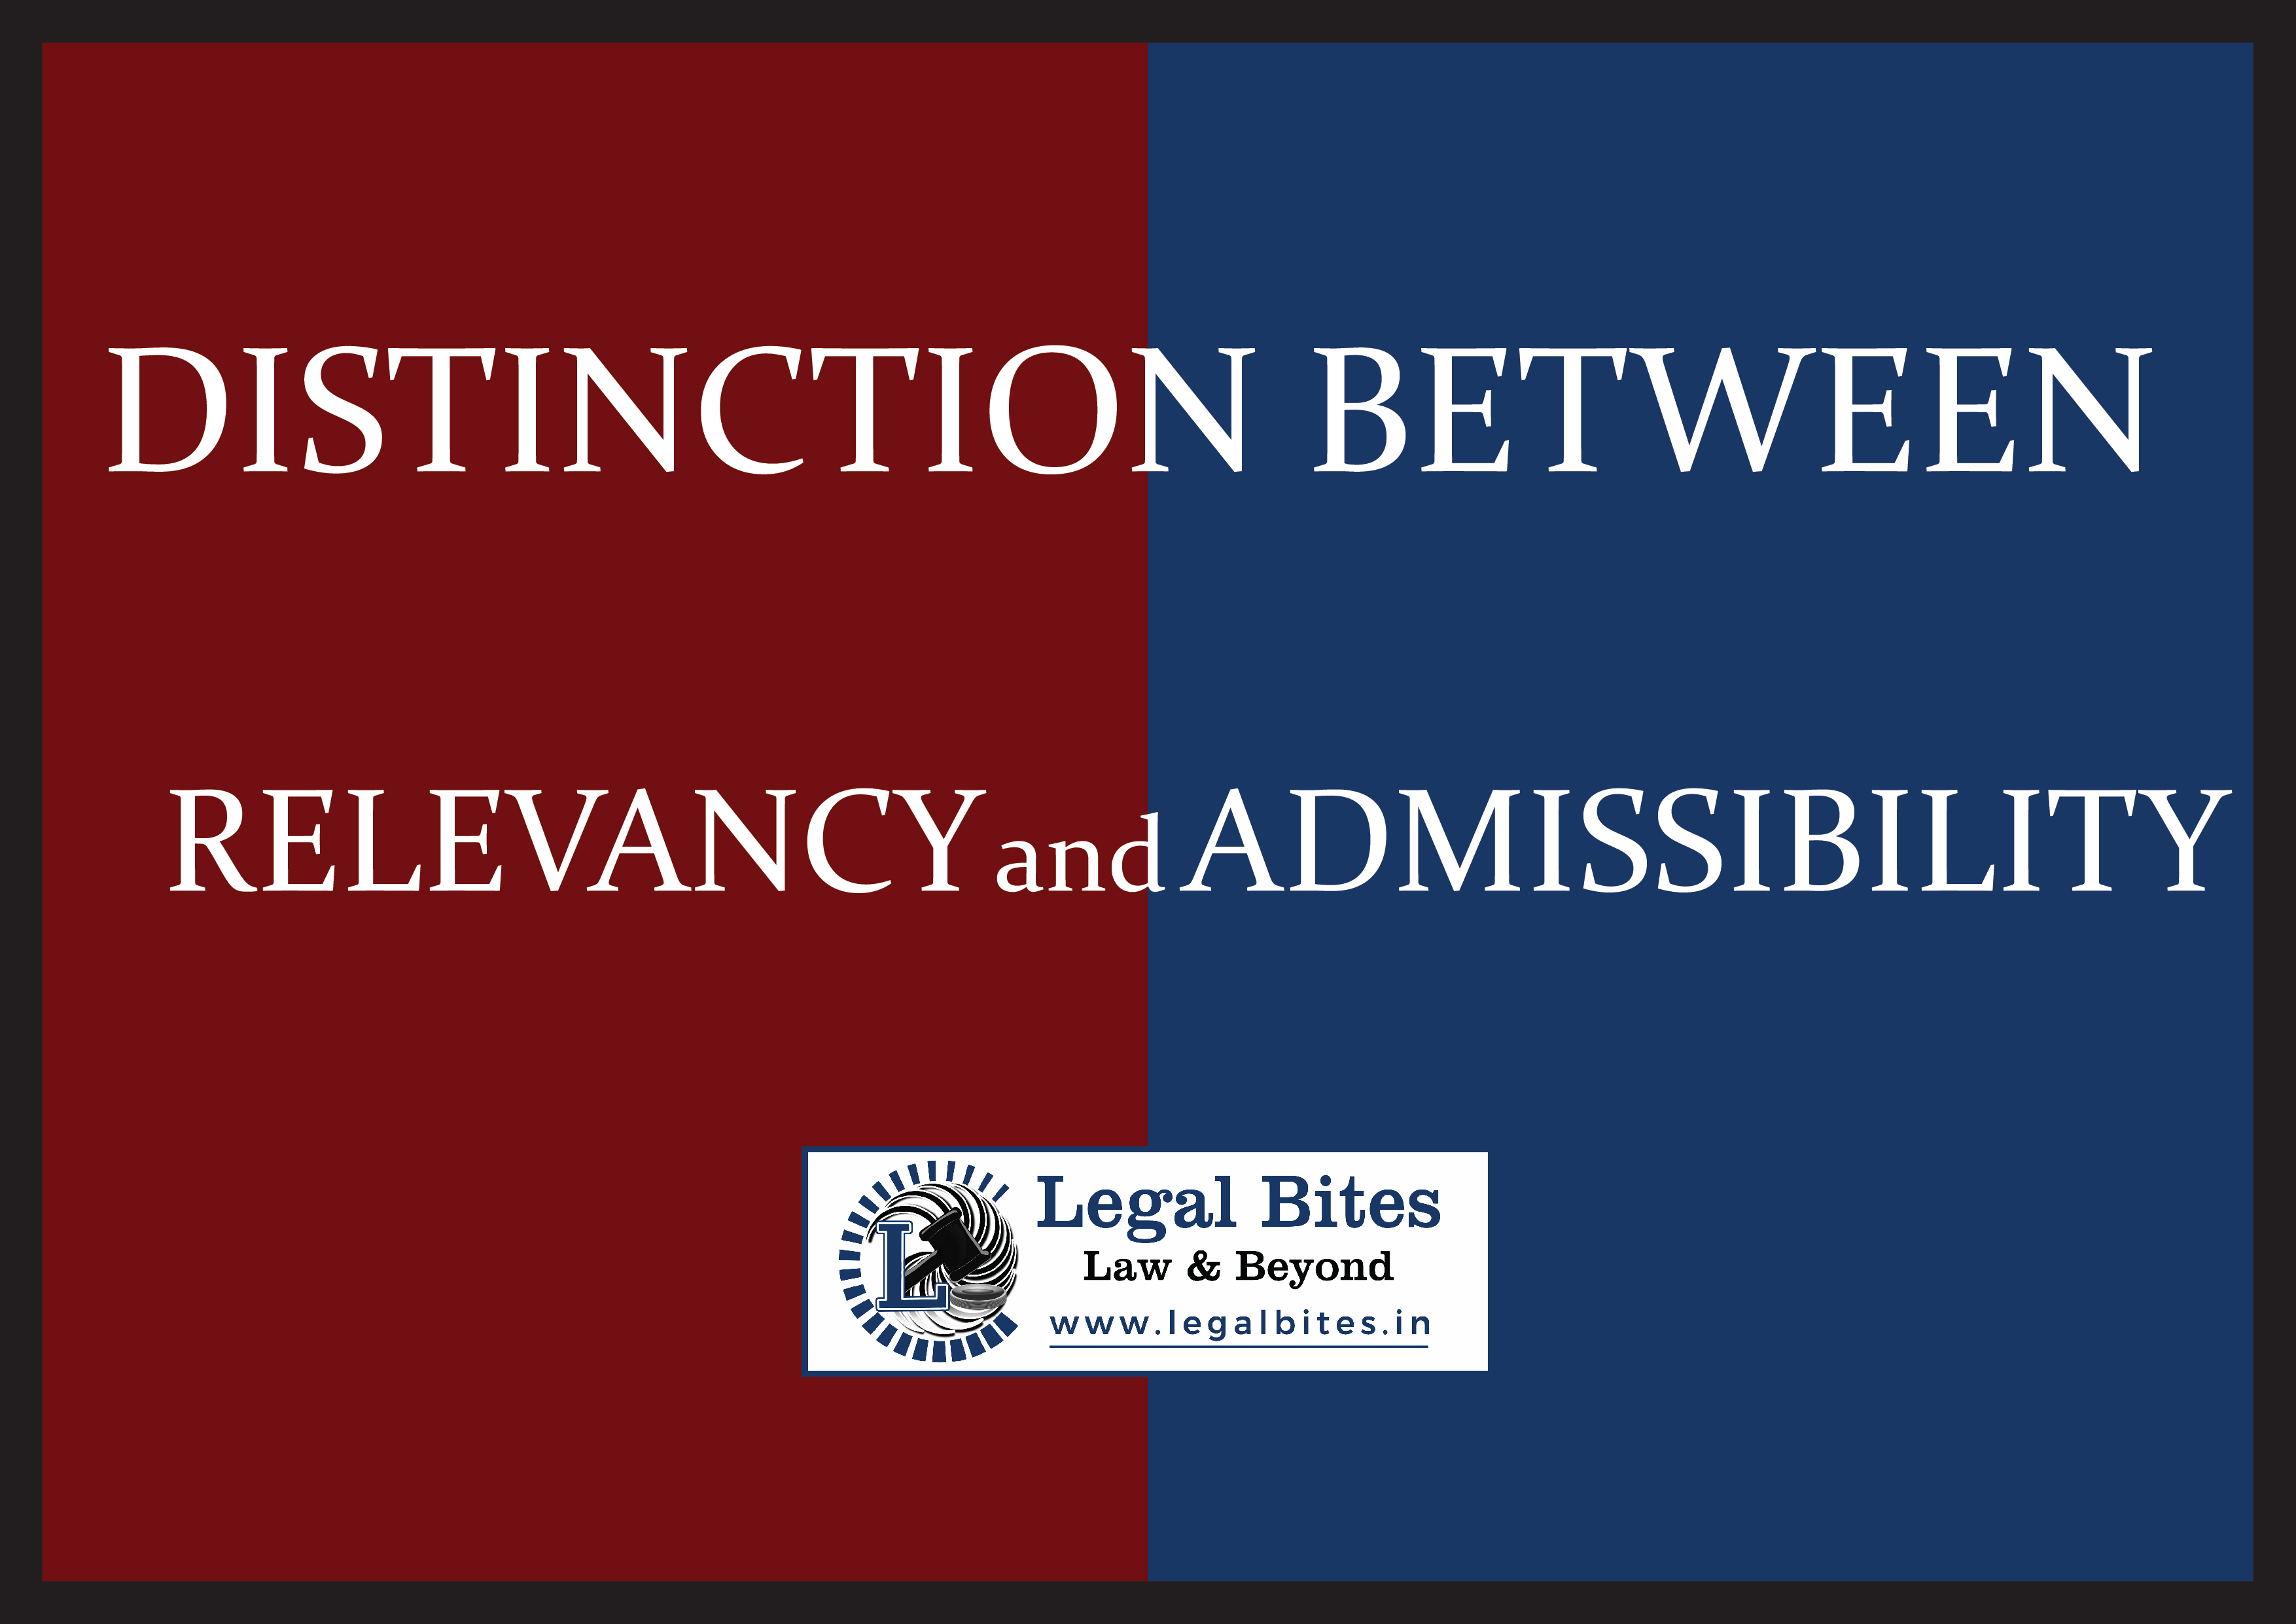 Distinction between Relevancy and Admissibility